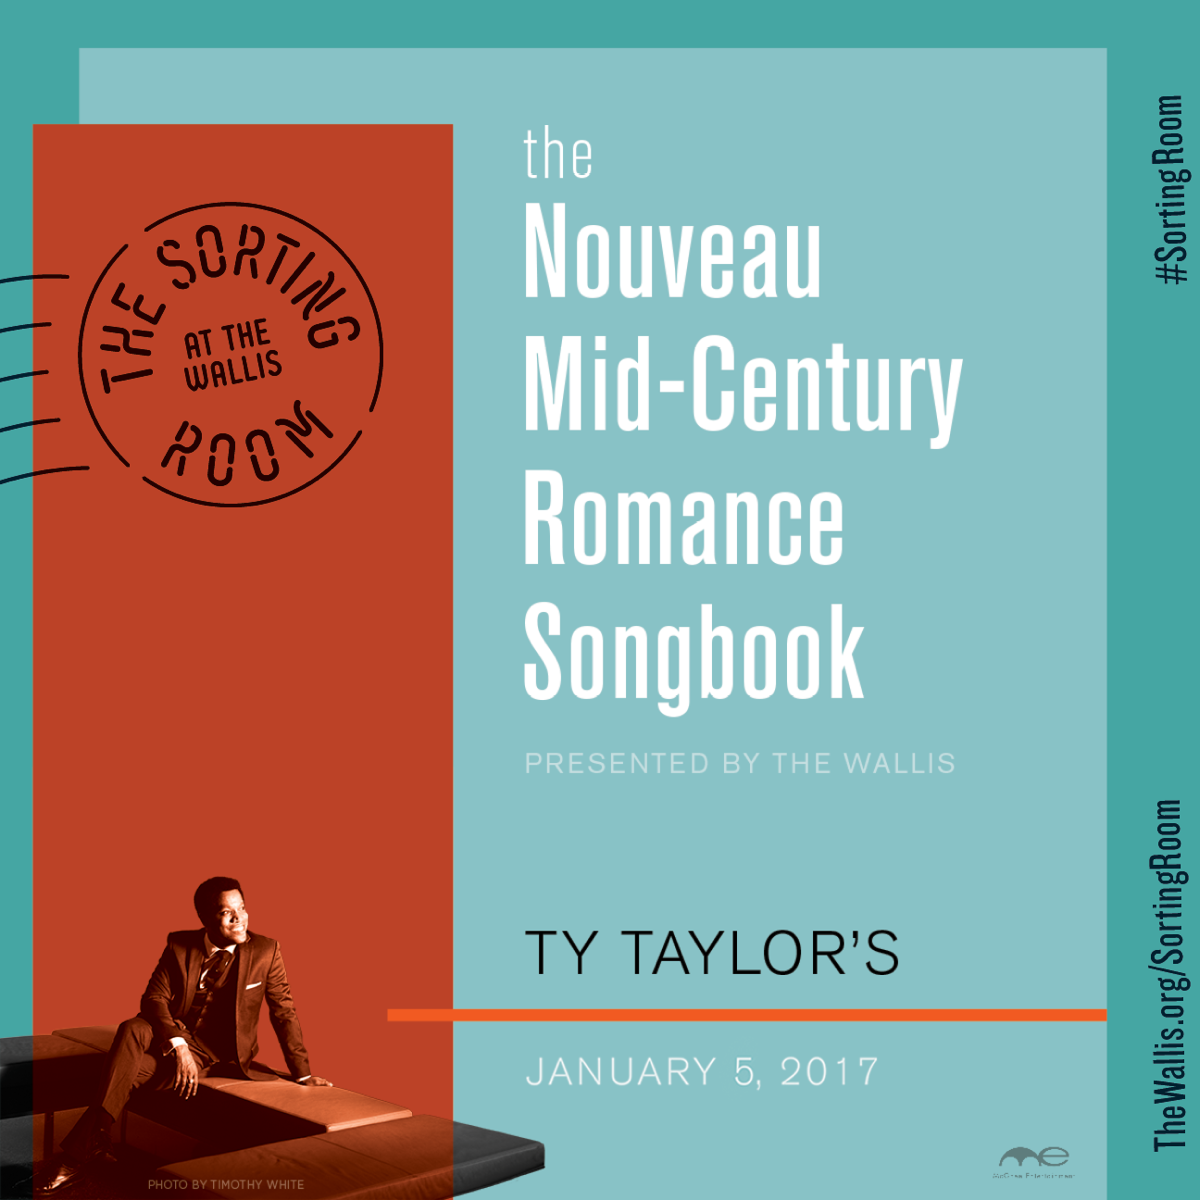 Ty Taylor’s The Nouveau Mid-Century Romance Songbook